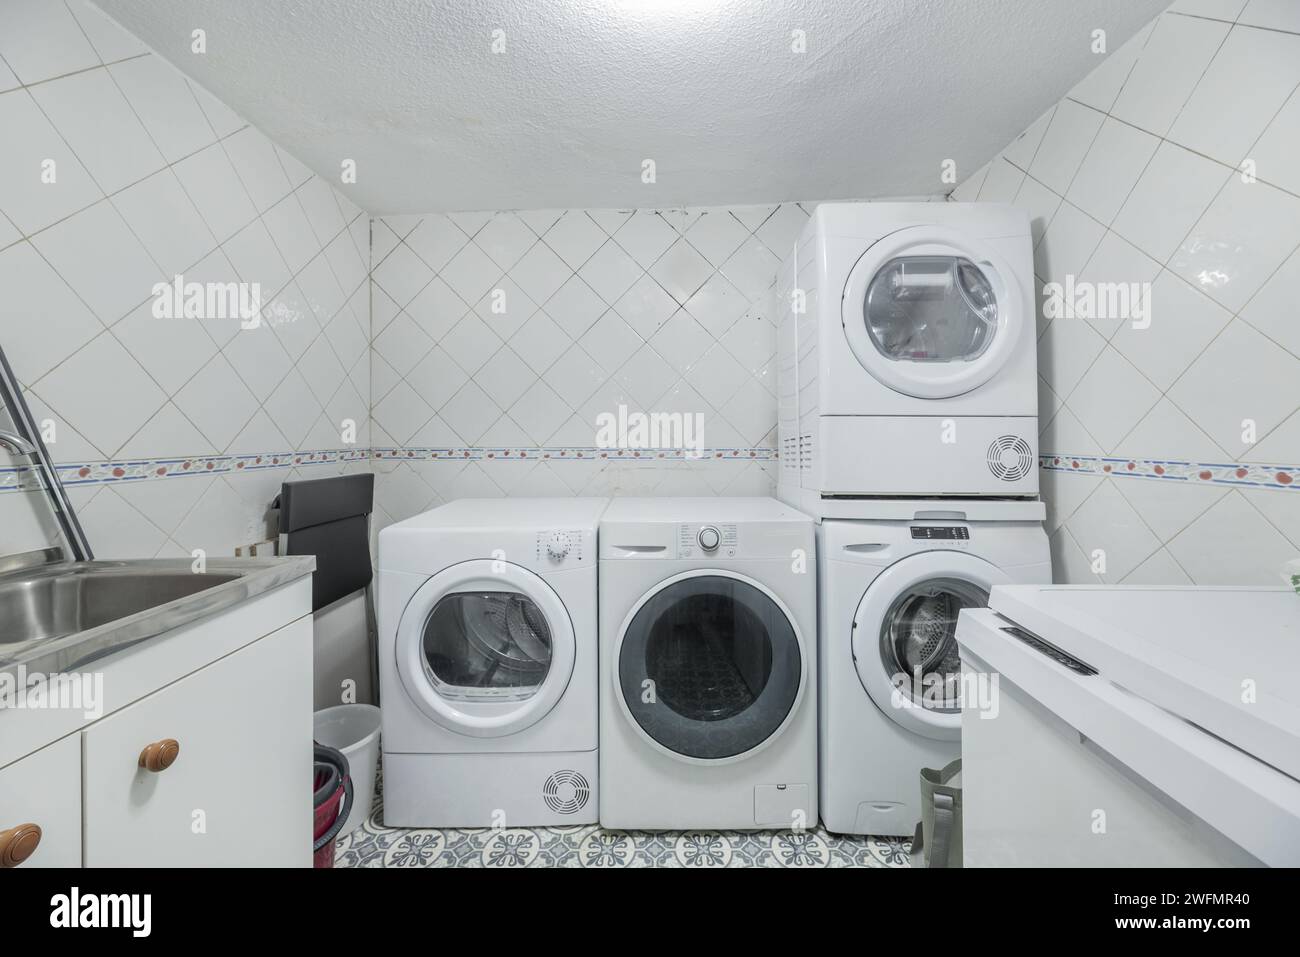 A room dedicated to laundry on the ground floor of a house full of washing machines and dryers Stock Photo